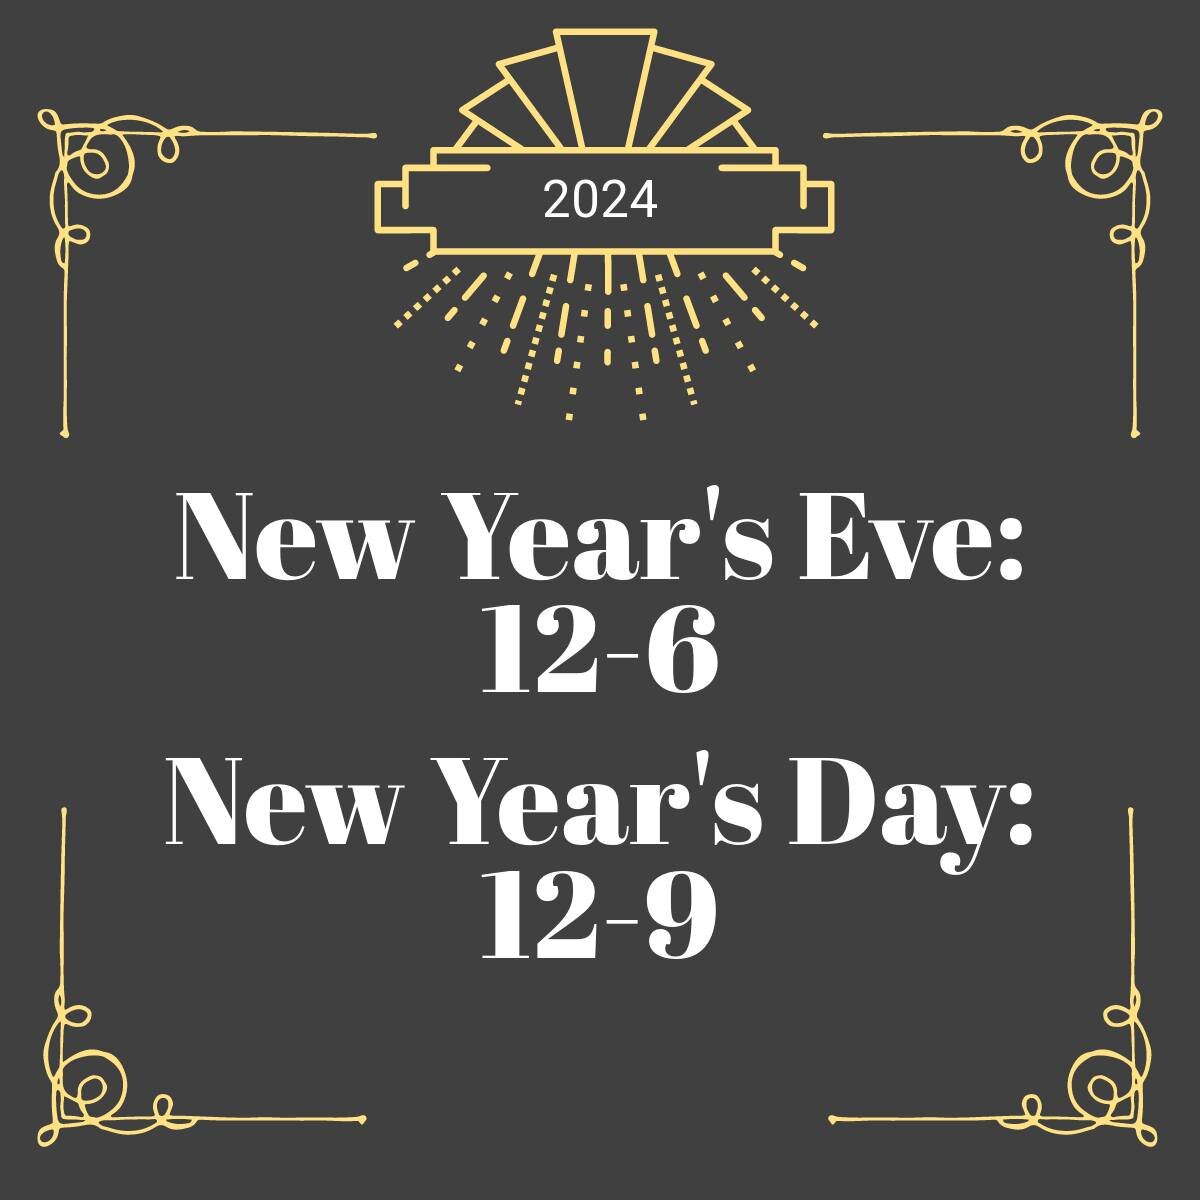 IT'S ALMOST TIME TO RING IN THE NEW YEAR! 🥂🎆We will be closing early on New Year's Eve, and open for normal business hours on New Year's Day. Stop by to get your final cup of boba before the end of the year!

NEW YEAR'S EVE: 12-6
NEW YEAR'S DAY: 12